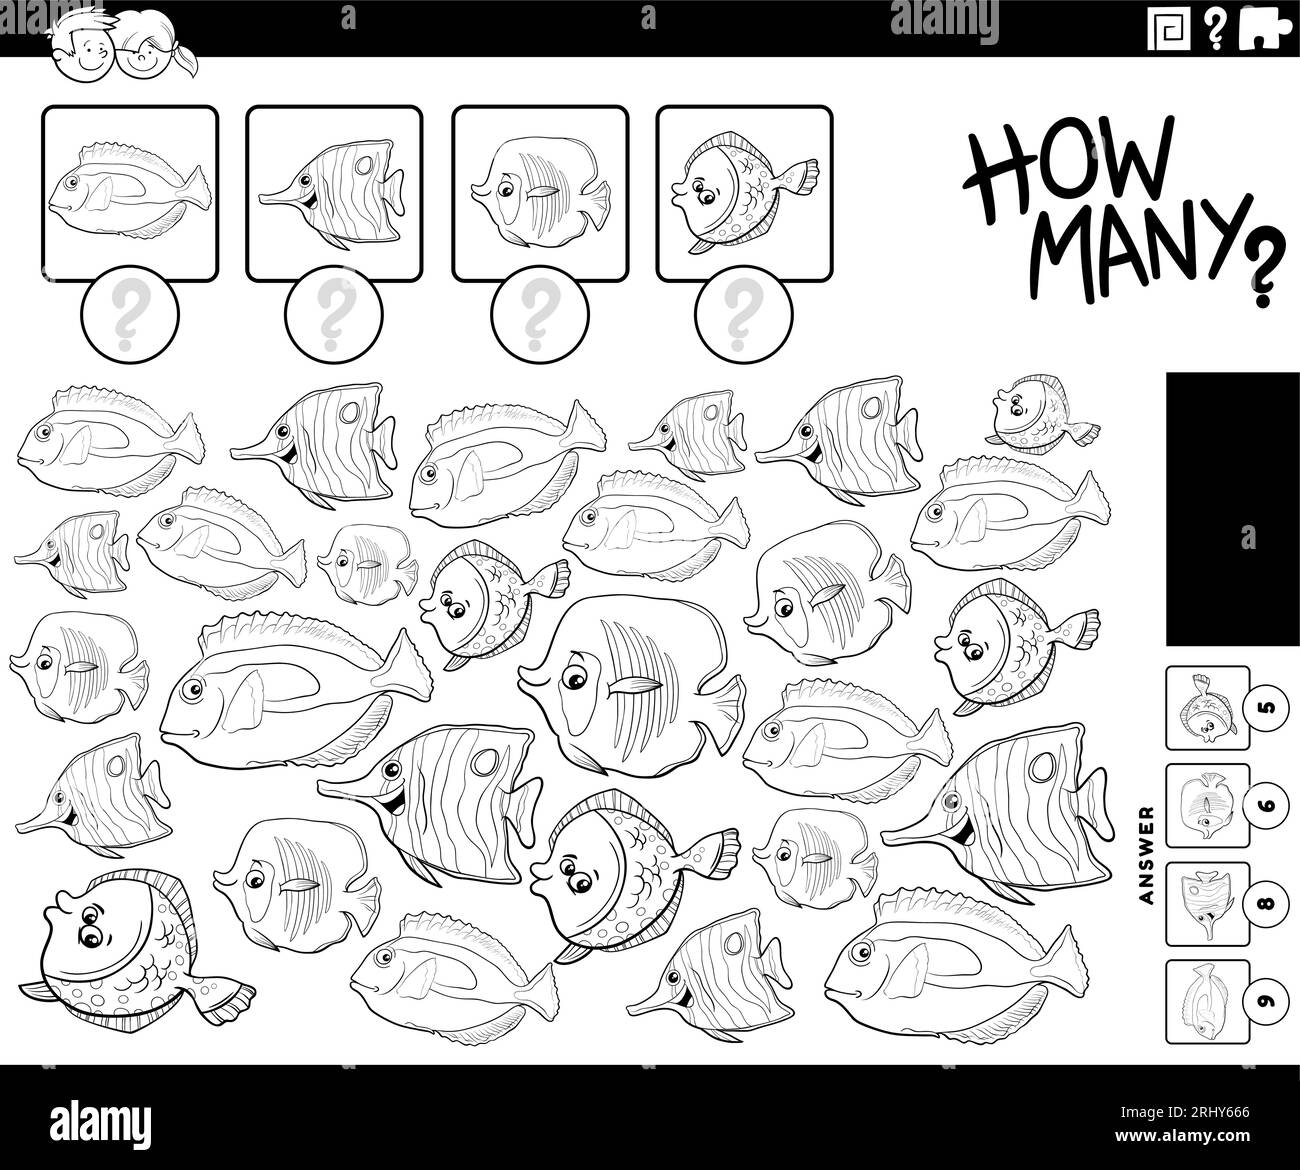 Black and white illustration of educational counting activity with